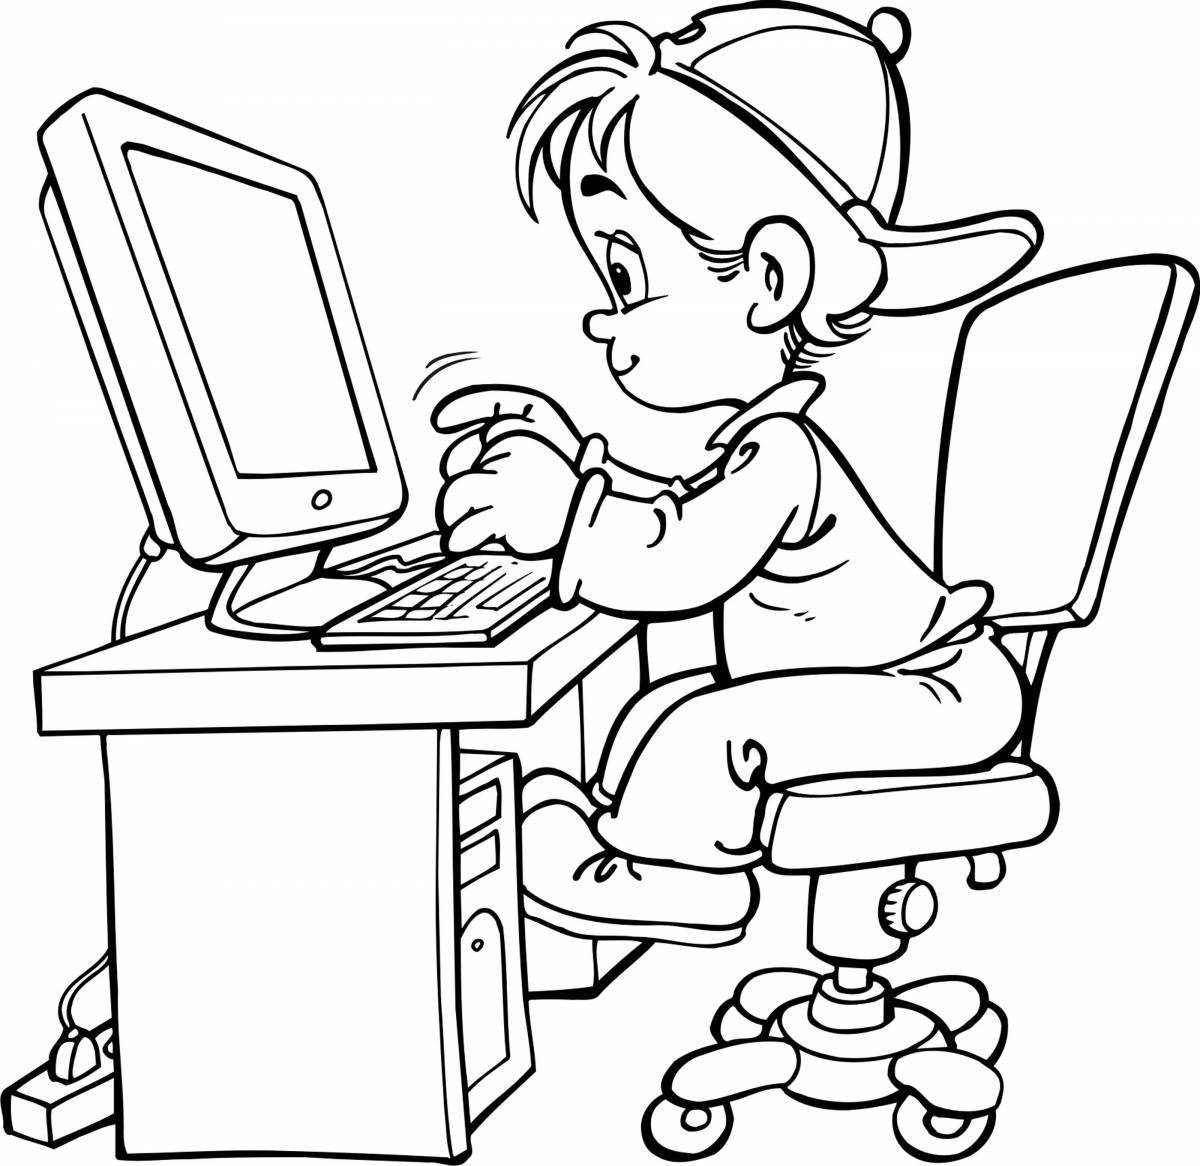 Fun coloring book programmer for kids